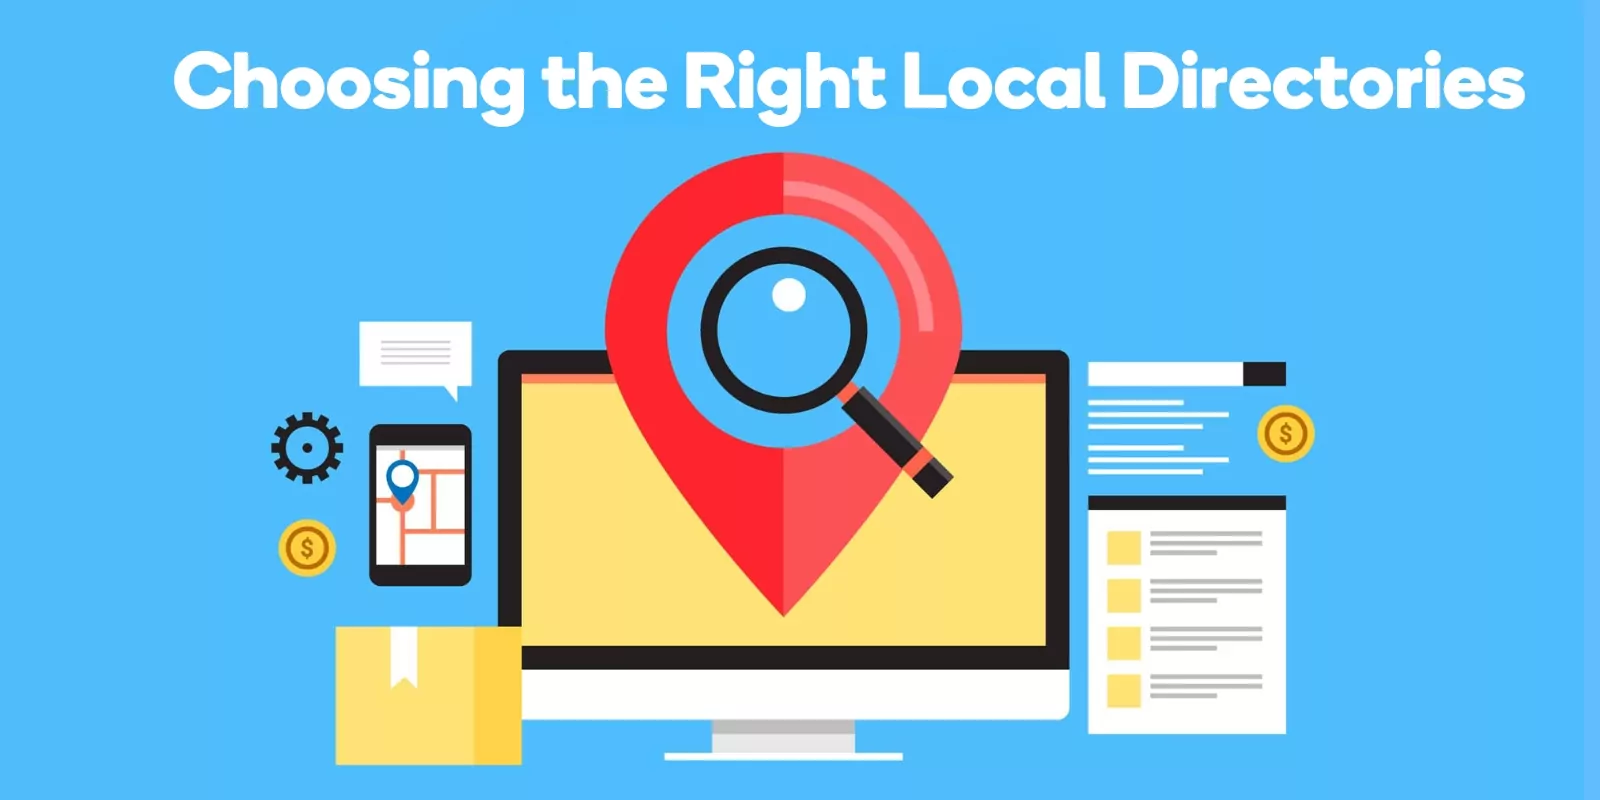 Choosing the Right Local Directories